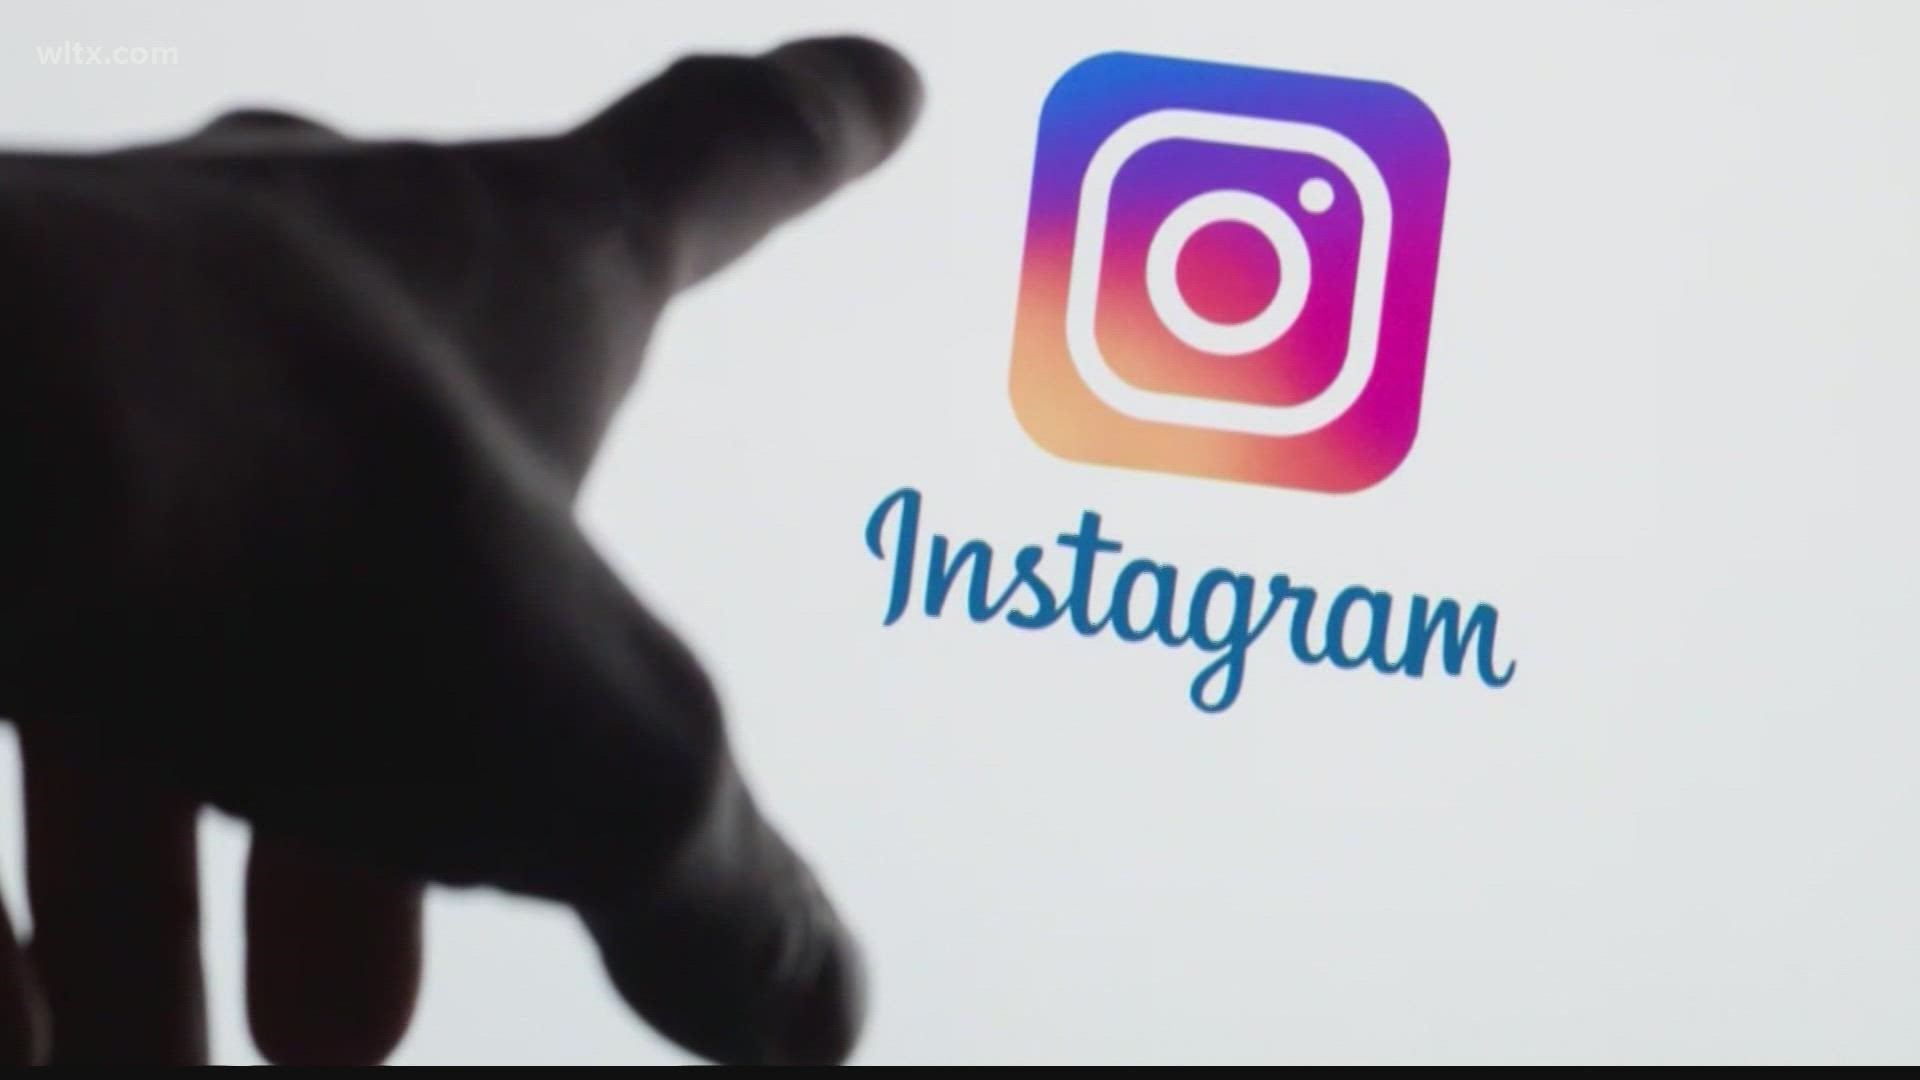 The investigation is into Instagram's impact on children and young adults.